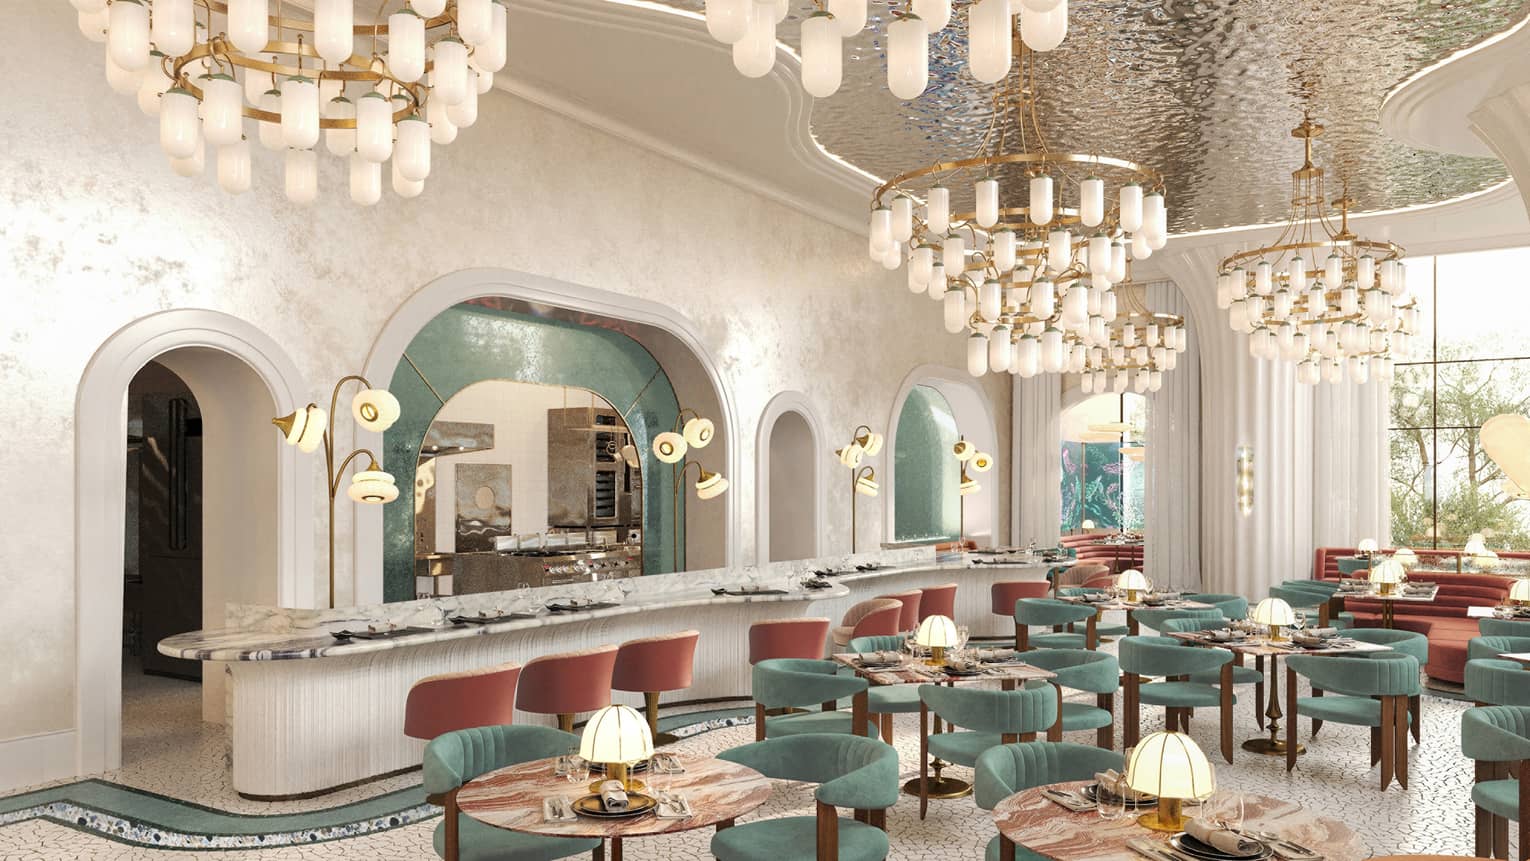 Restaurant with hanging chandeliers, emerald-green chairs and marble tables